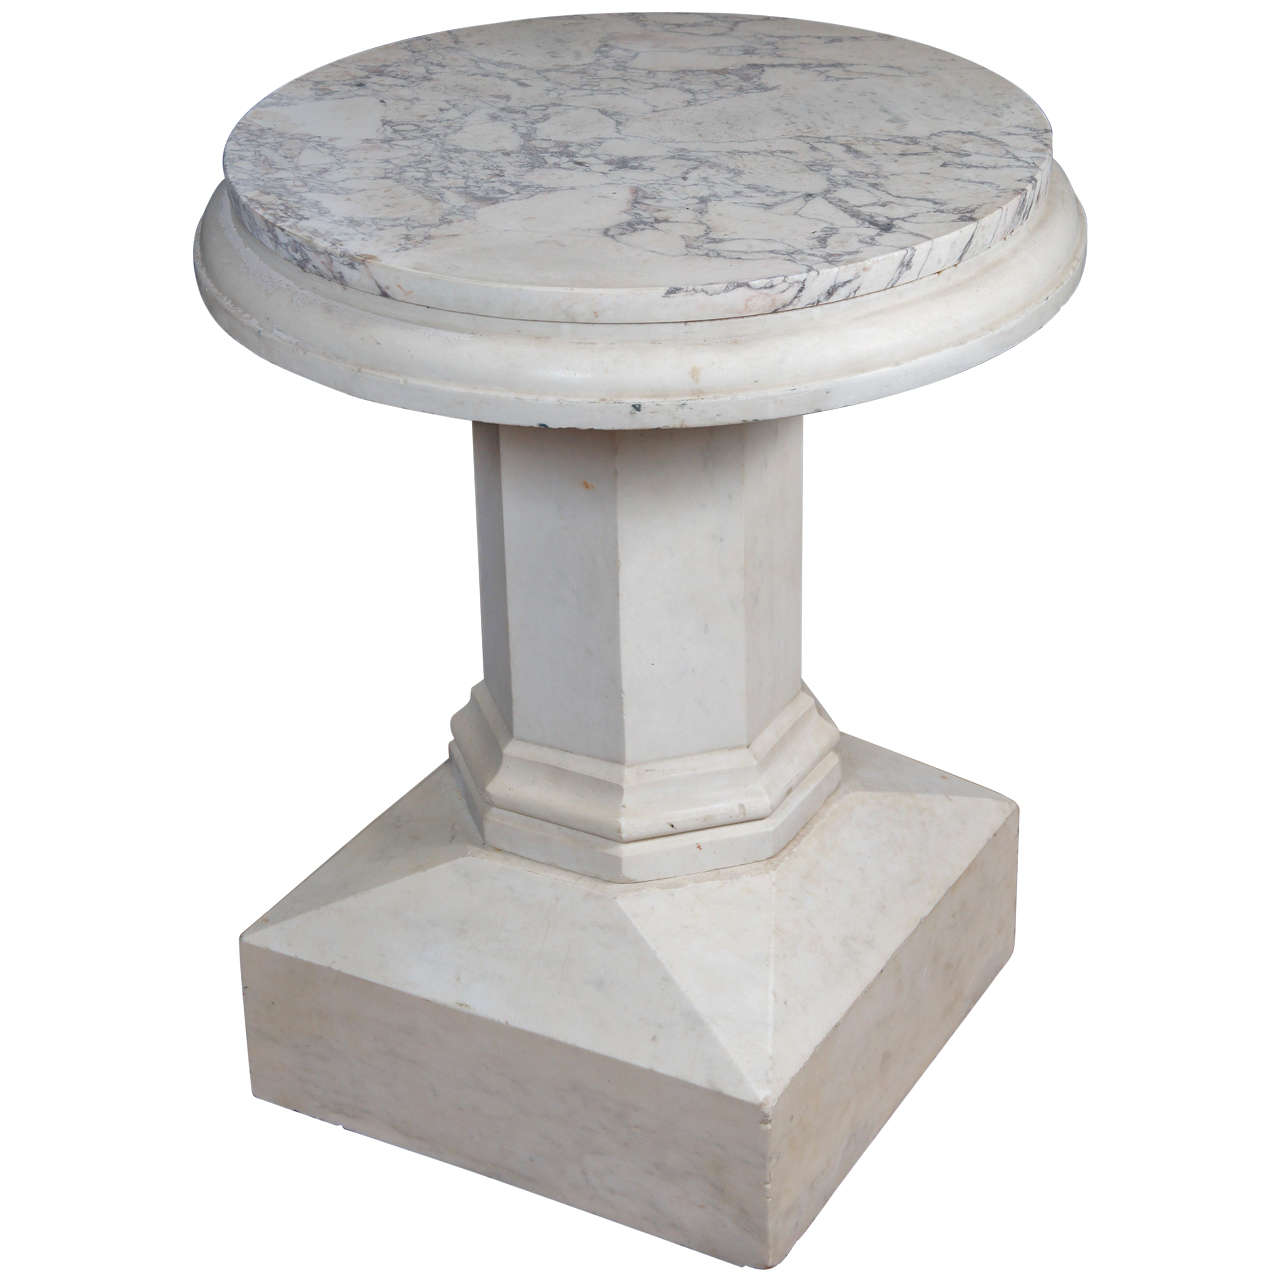 An Edwardian Carved Marble Table With a Marble Top